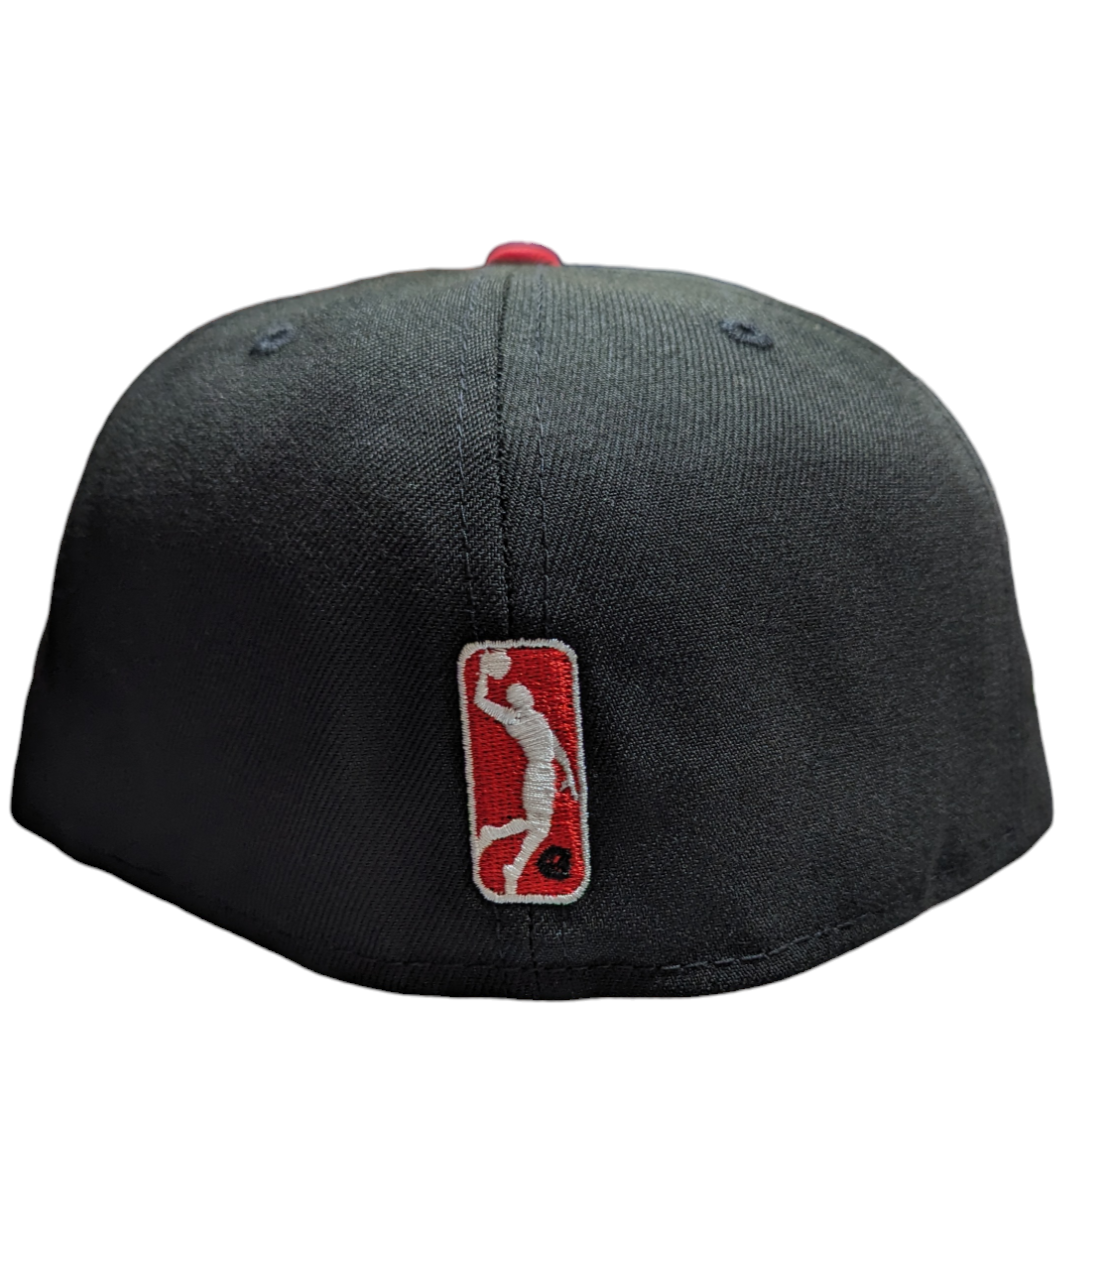 Windy City Bulls New Era Black Secondary 59FIFTY Fitted Hat